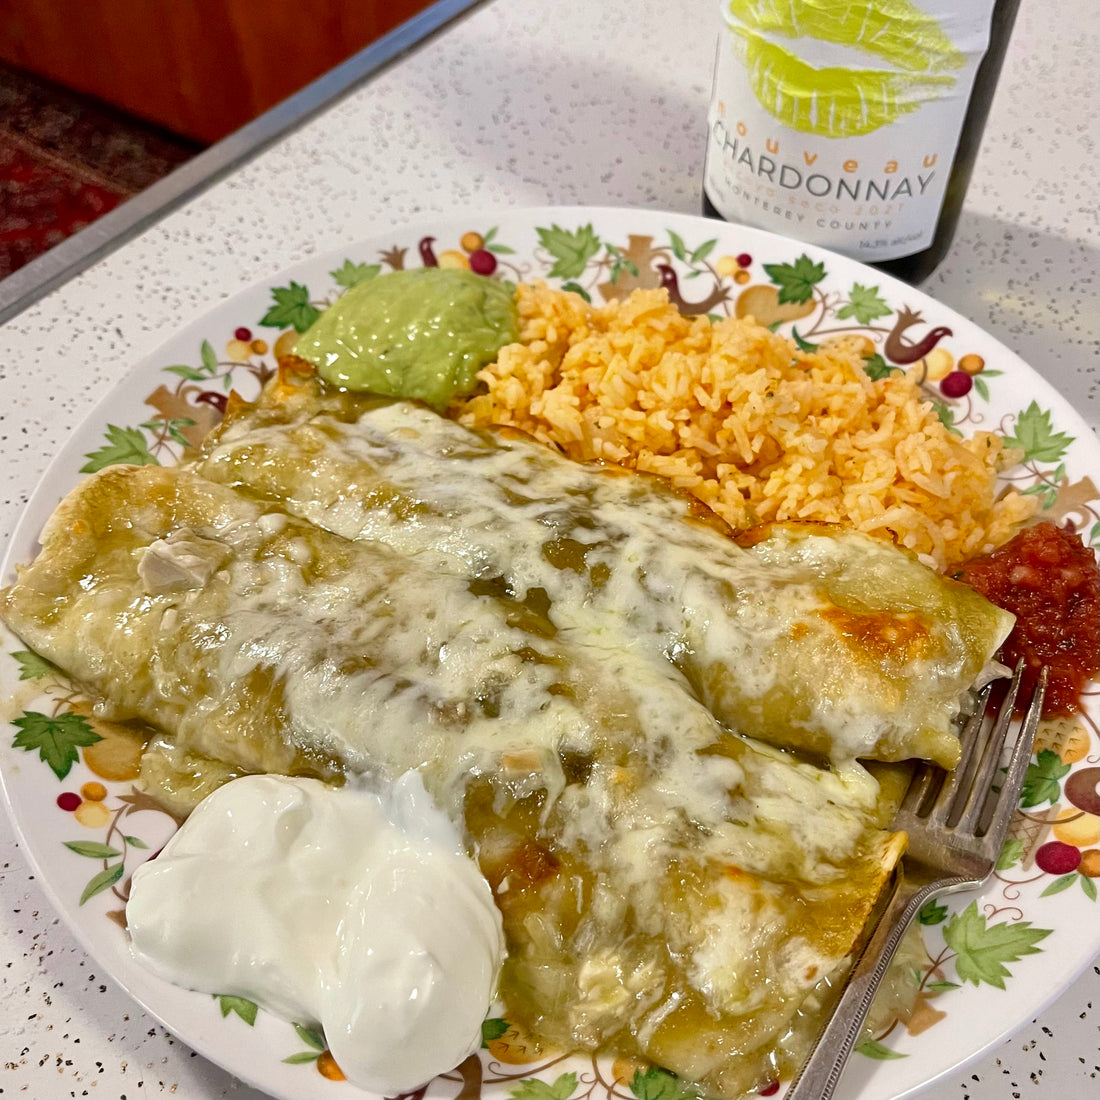 For a good time, just add wine and green chile chicken enchiladas!